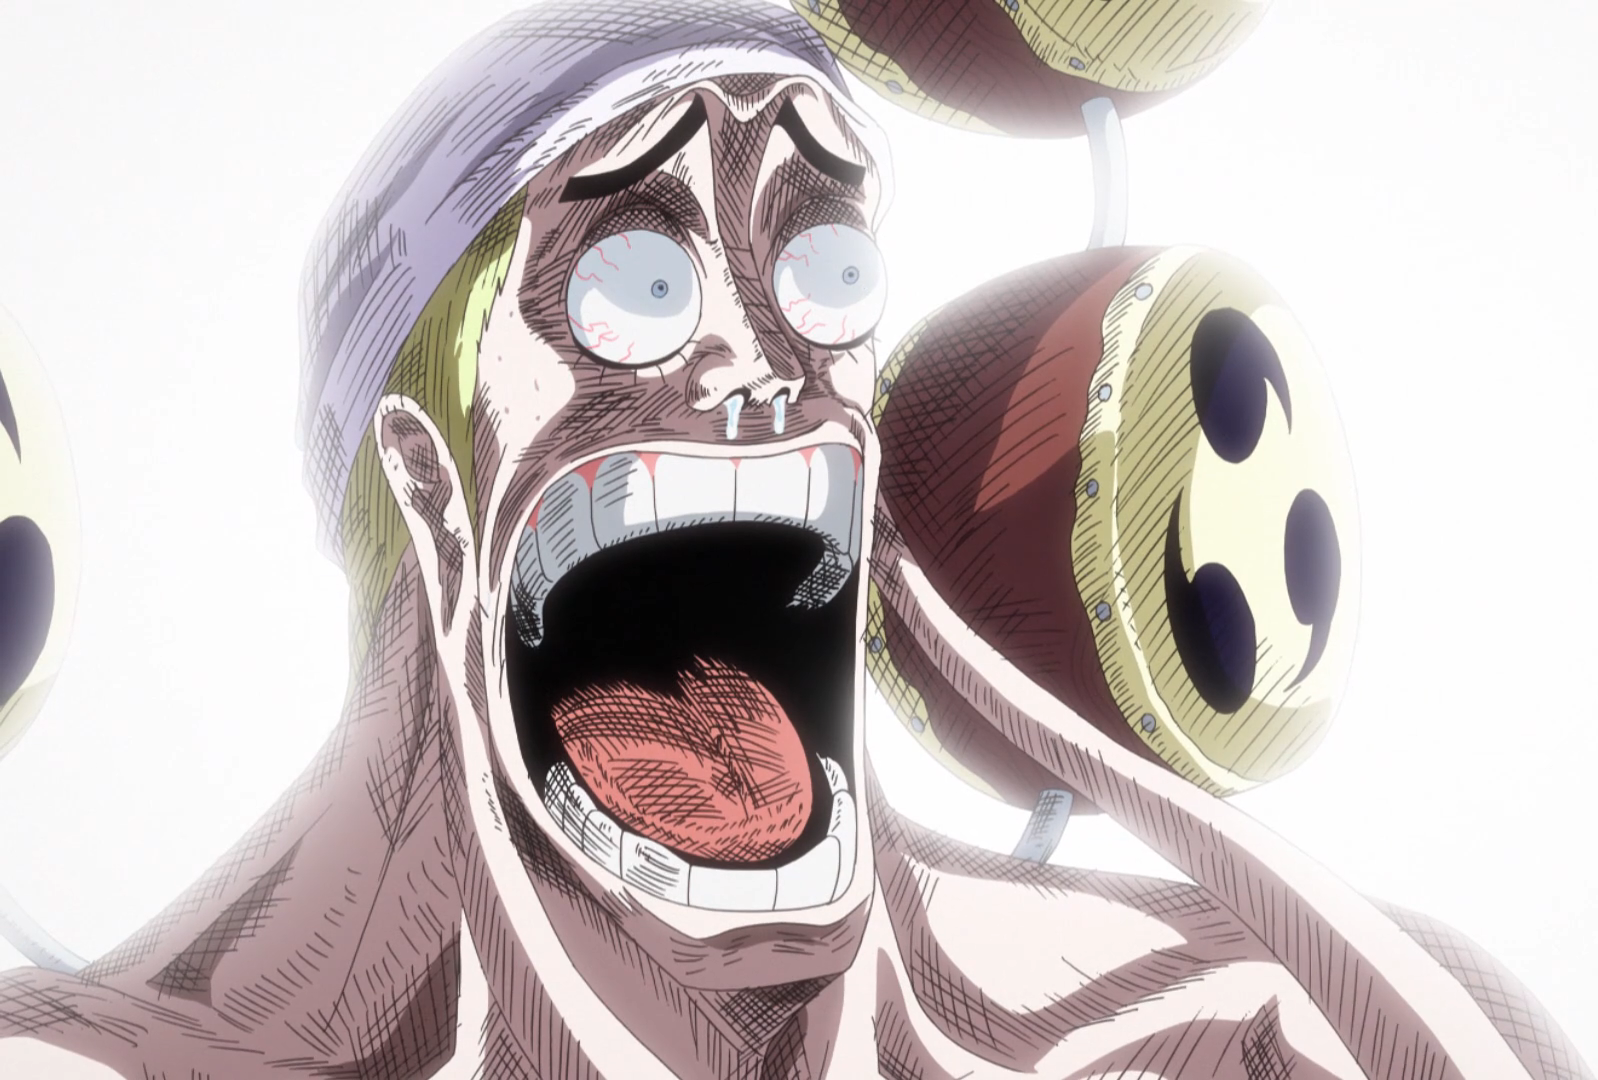 http://img2.wikia.nocookie.net/cb20131212015841/onepiece/images/0/04/Enel_S...